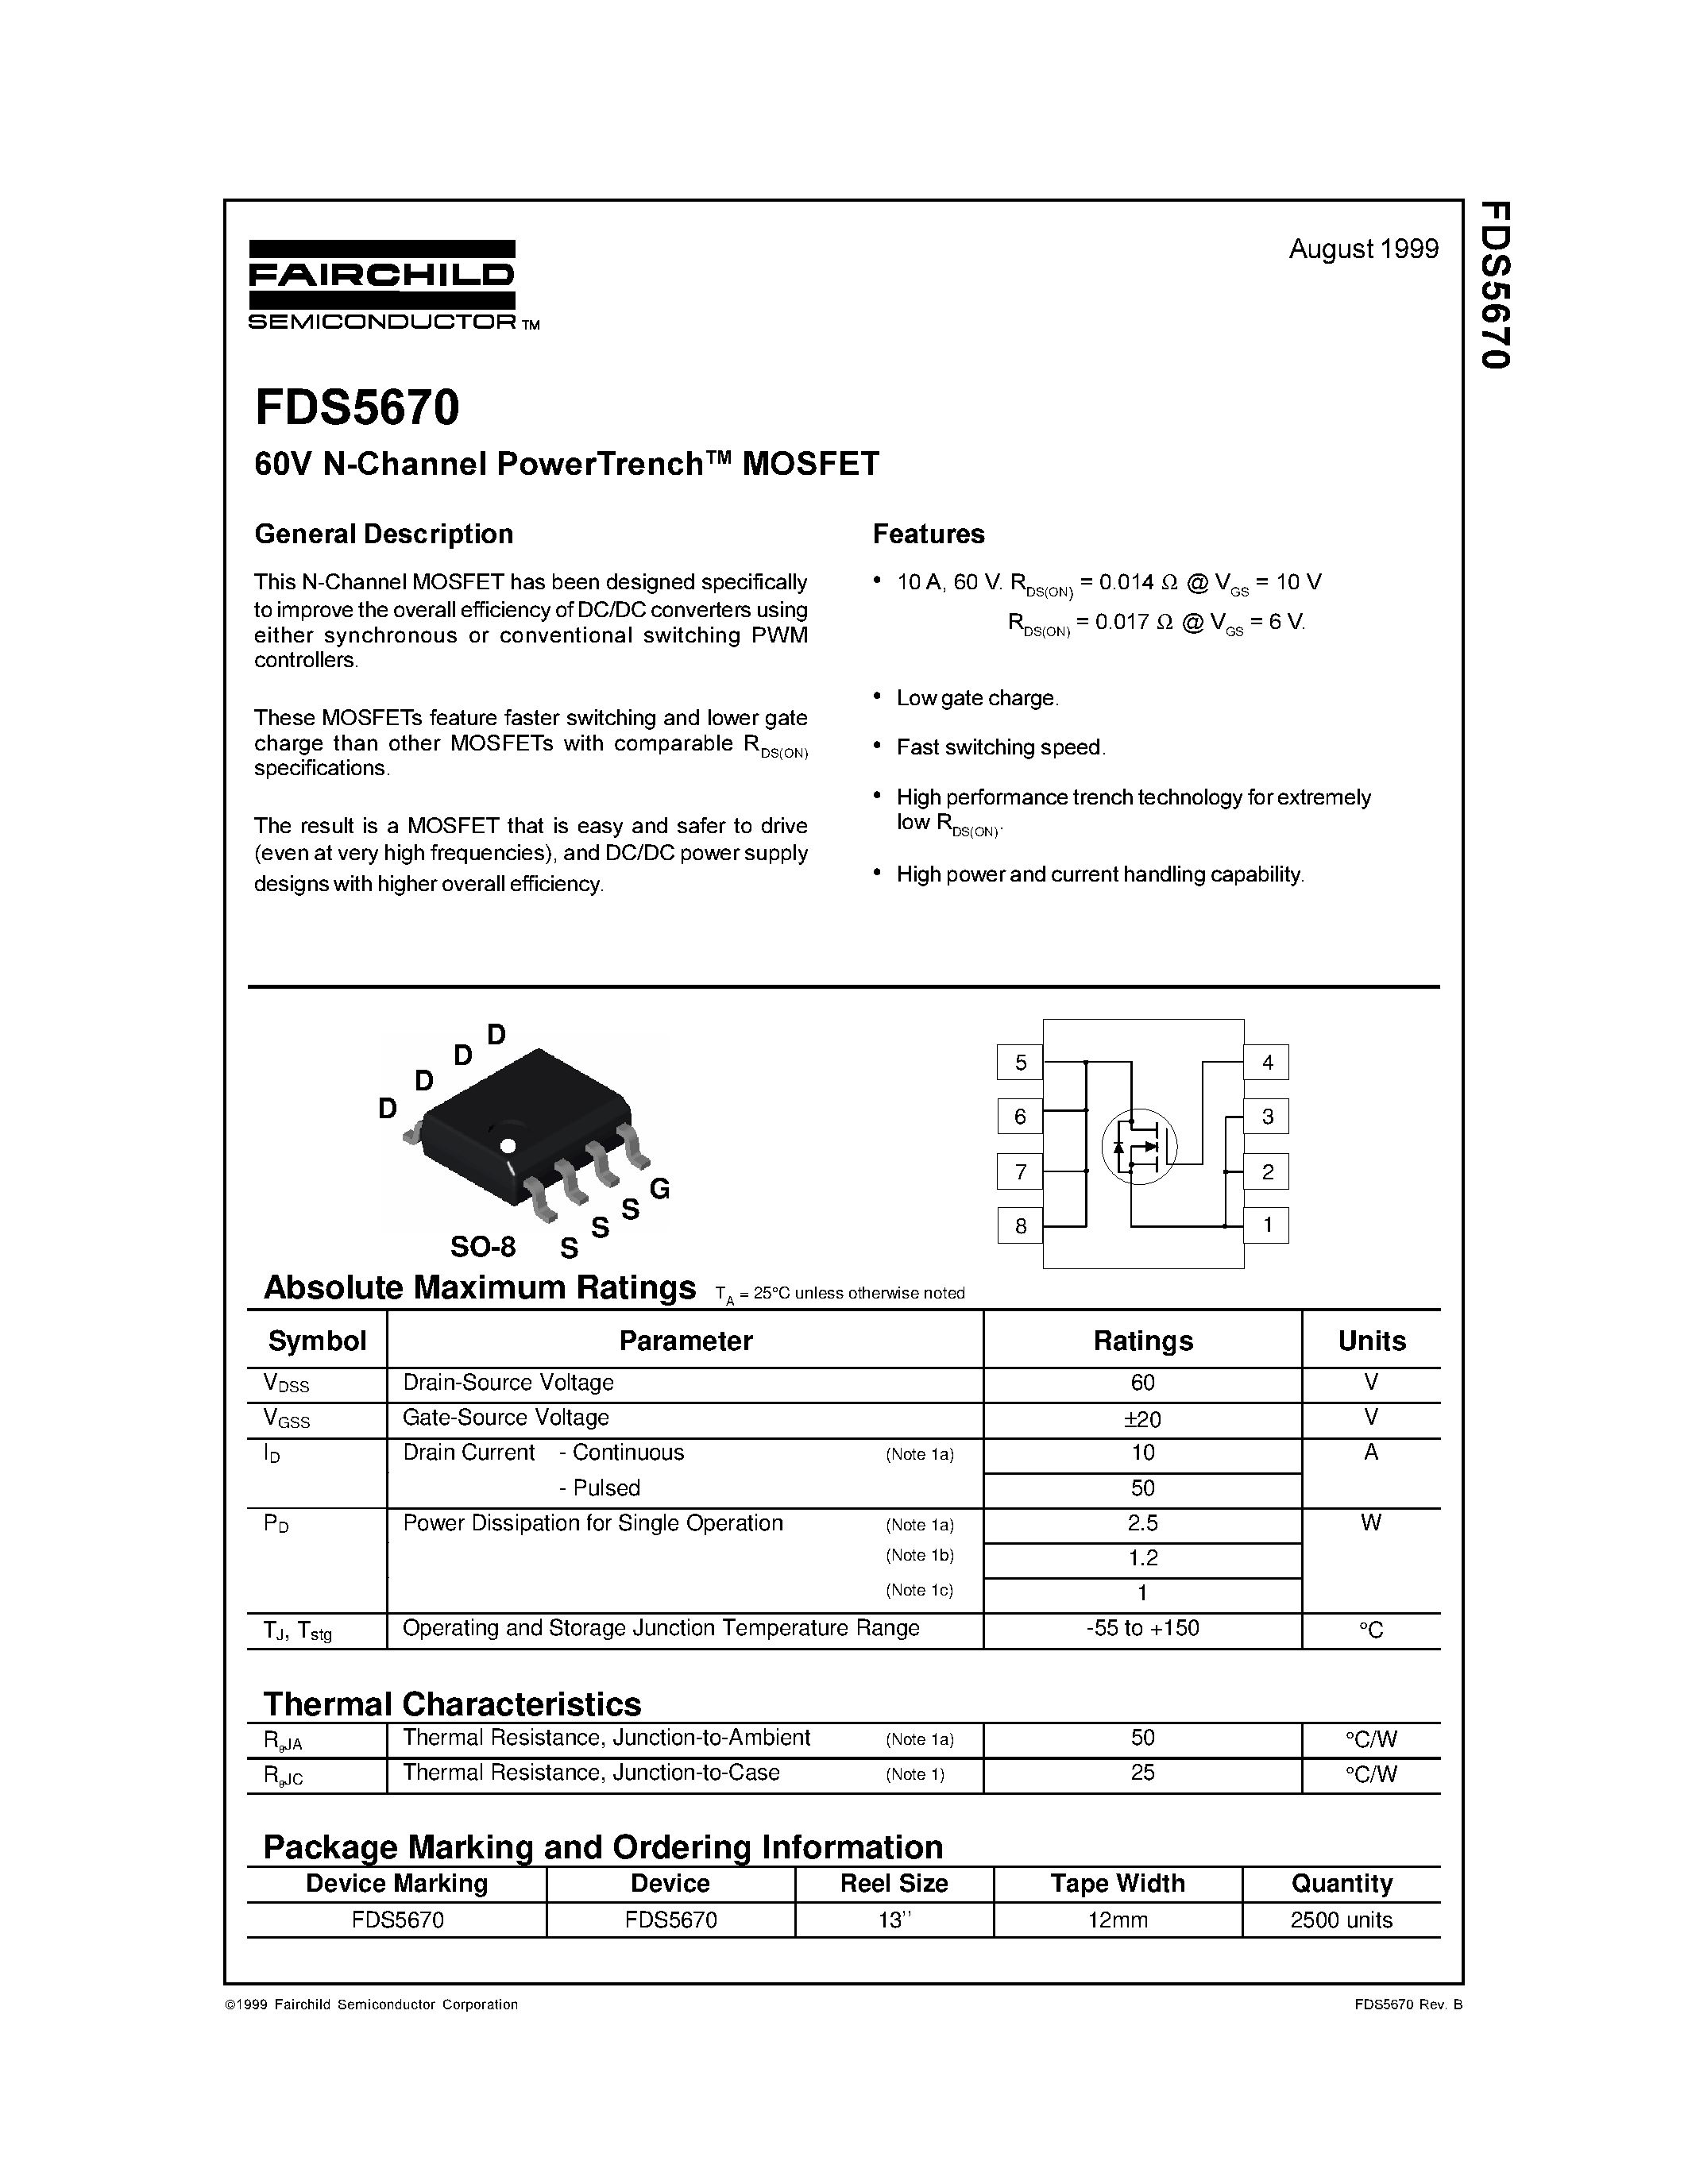 Datasheet FDS5670 - 60V N-Channel PowerTrench MOSFET page 1